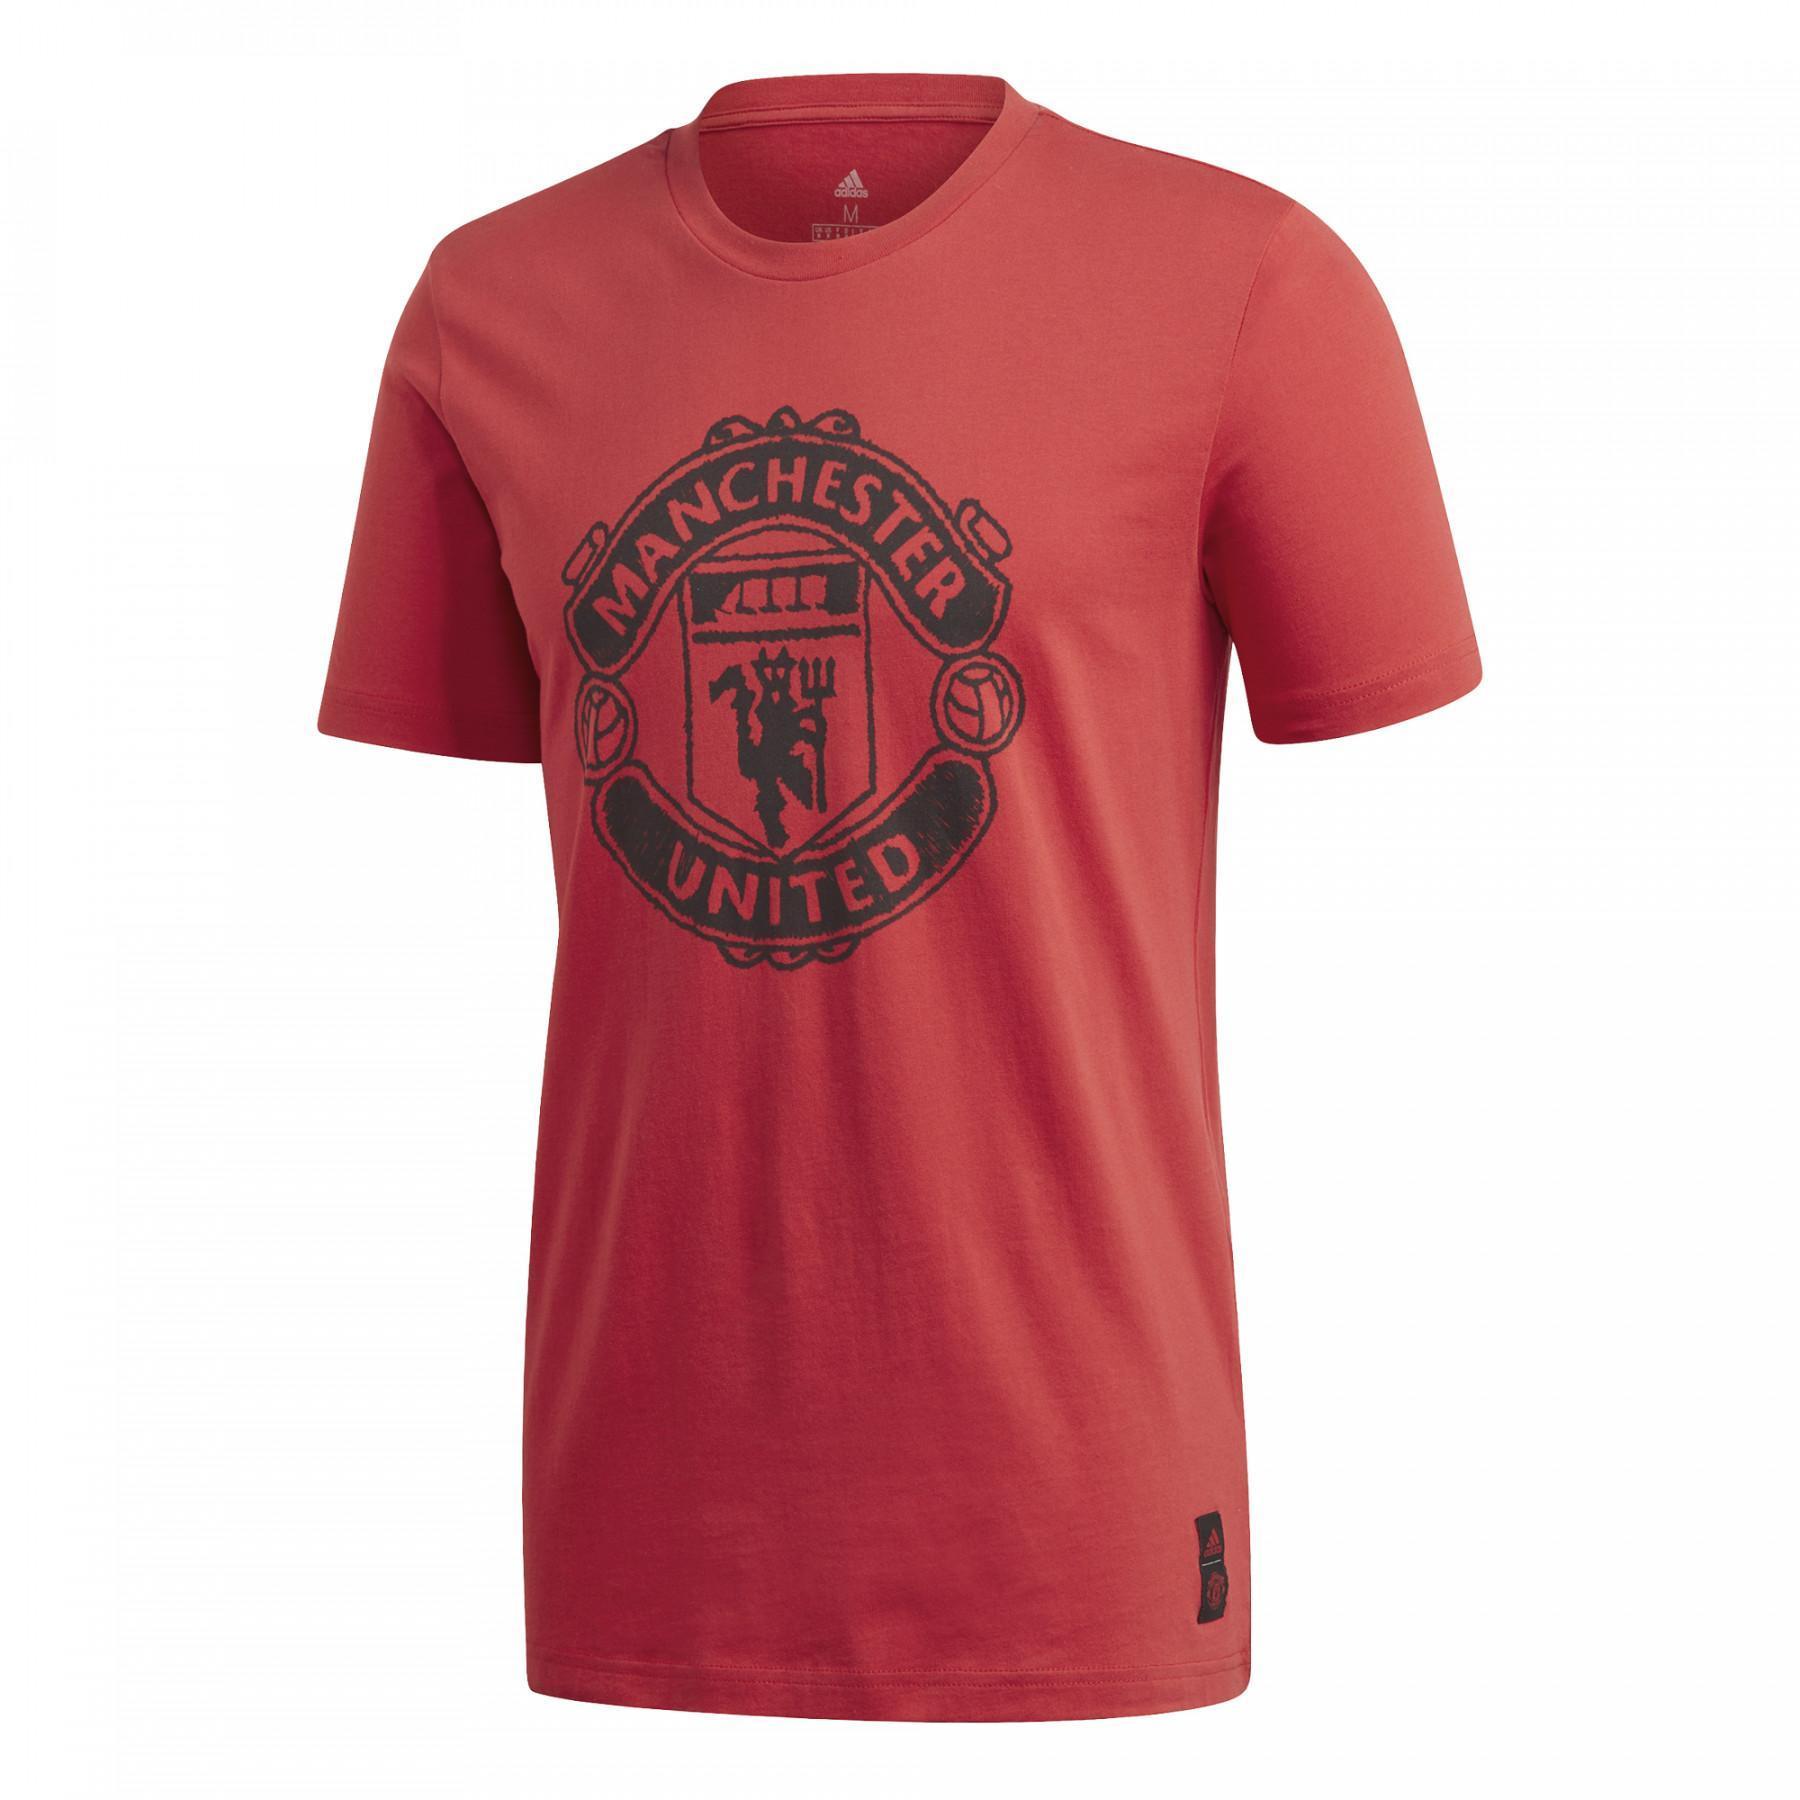 T-shirt Manchester United DNA Graphic 2020/21